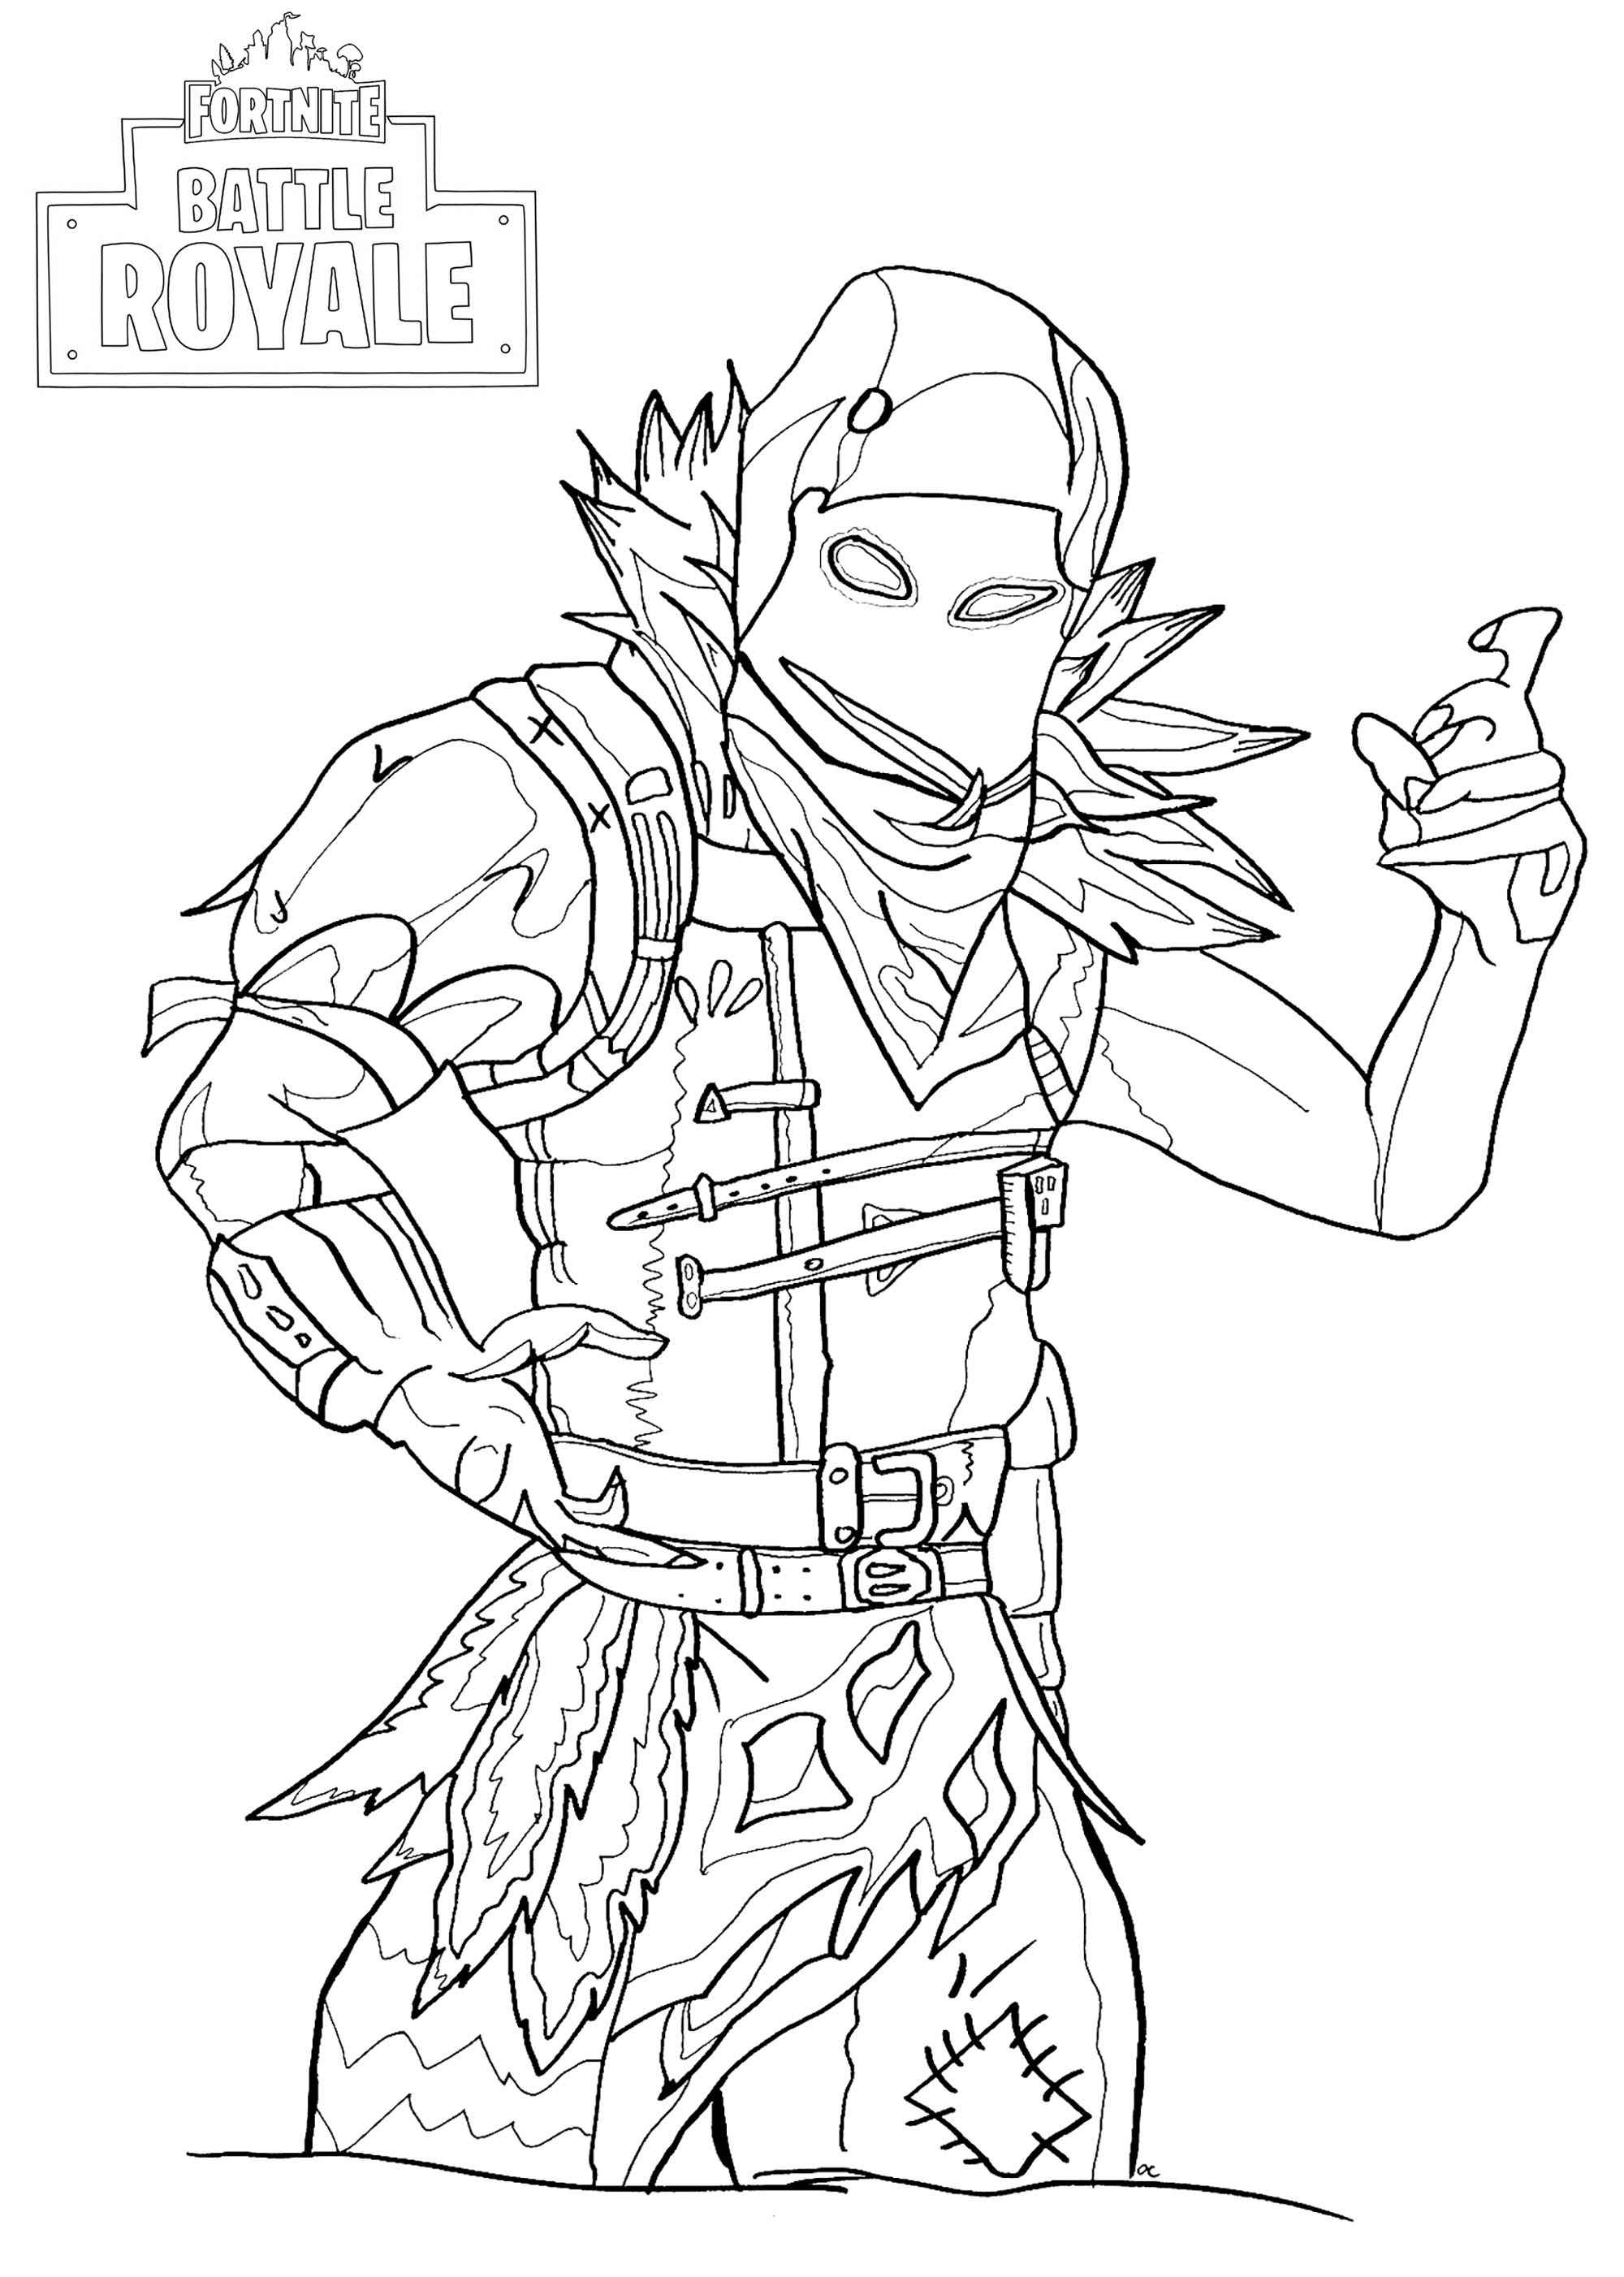 Top 10 Fortnite Coloring Pages Free - COLORING PAGES FOR ...